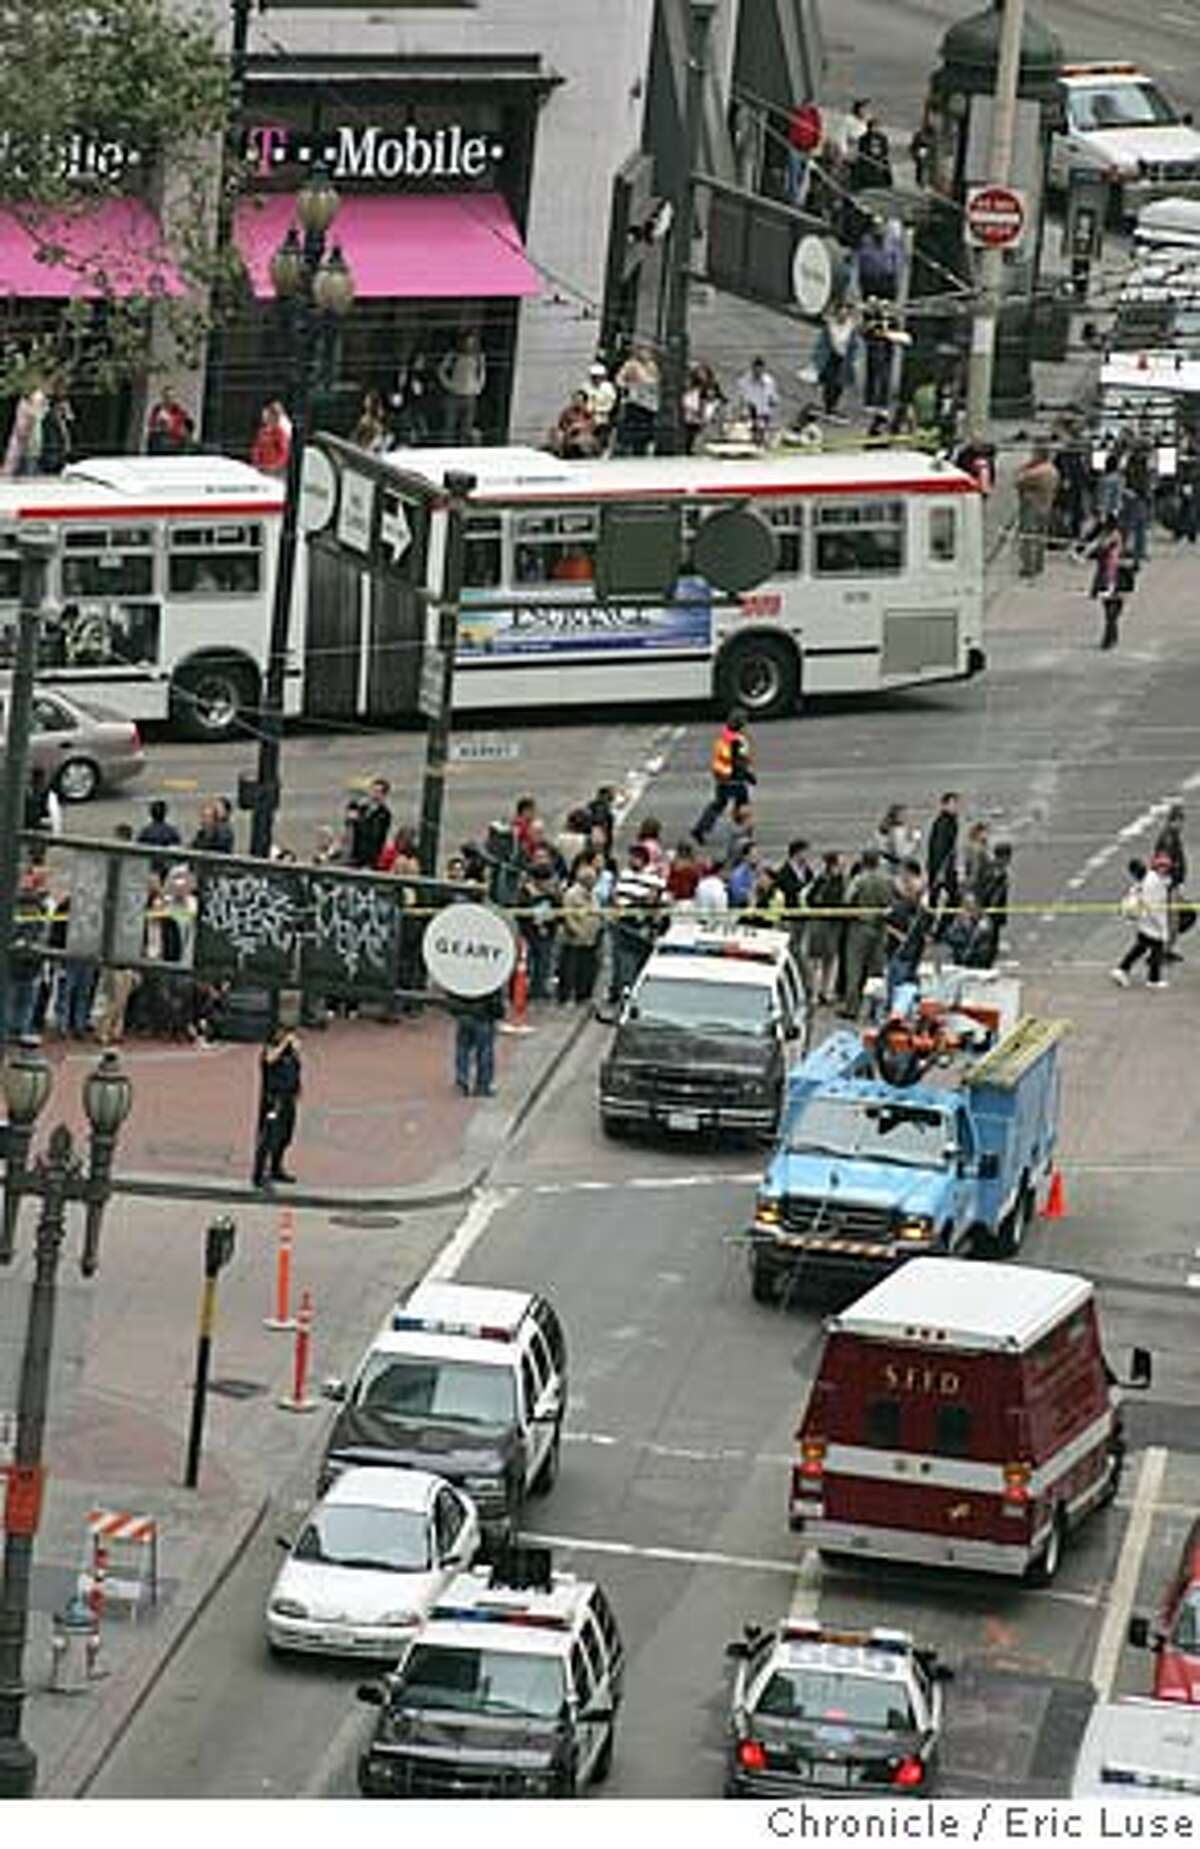 explosion_133_el.JPG Looking down Keary to Market Streets which were blocked off. Explosion at Kearny and Post in a PG&E underground transformer forced the evacuation of surrounding buildings and blocks of traffic rerouted. Event on explosion_133_el.JPG in San Francisco Eric Luse / The Chronicle